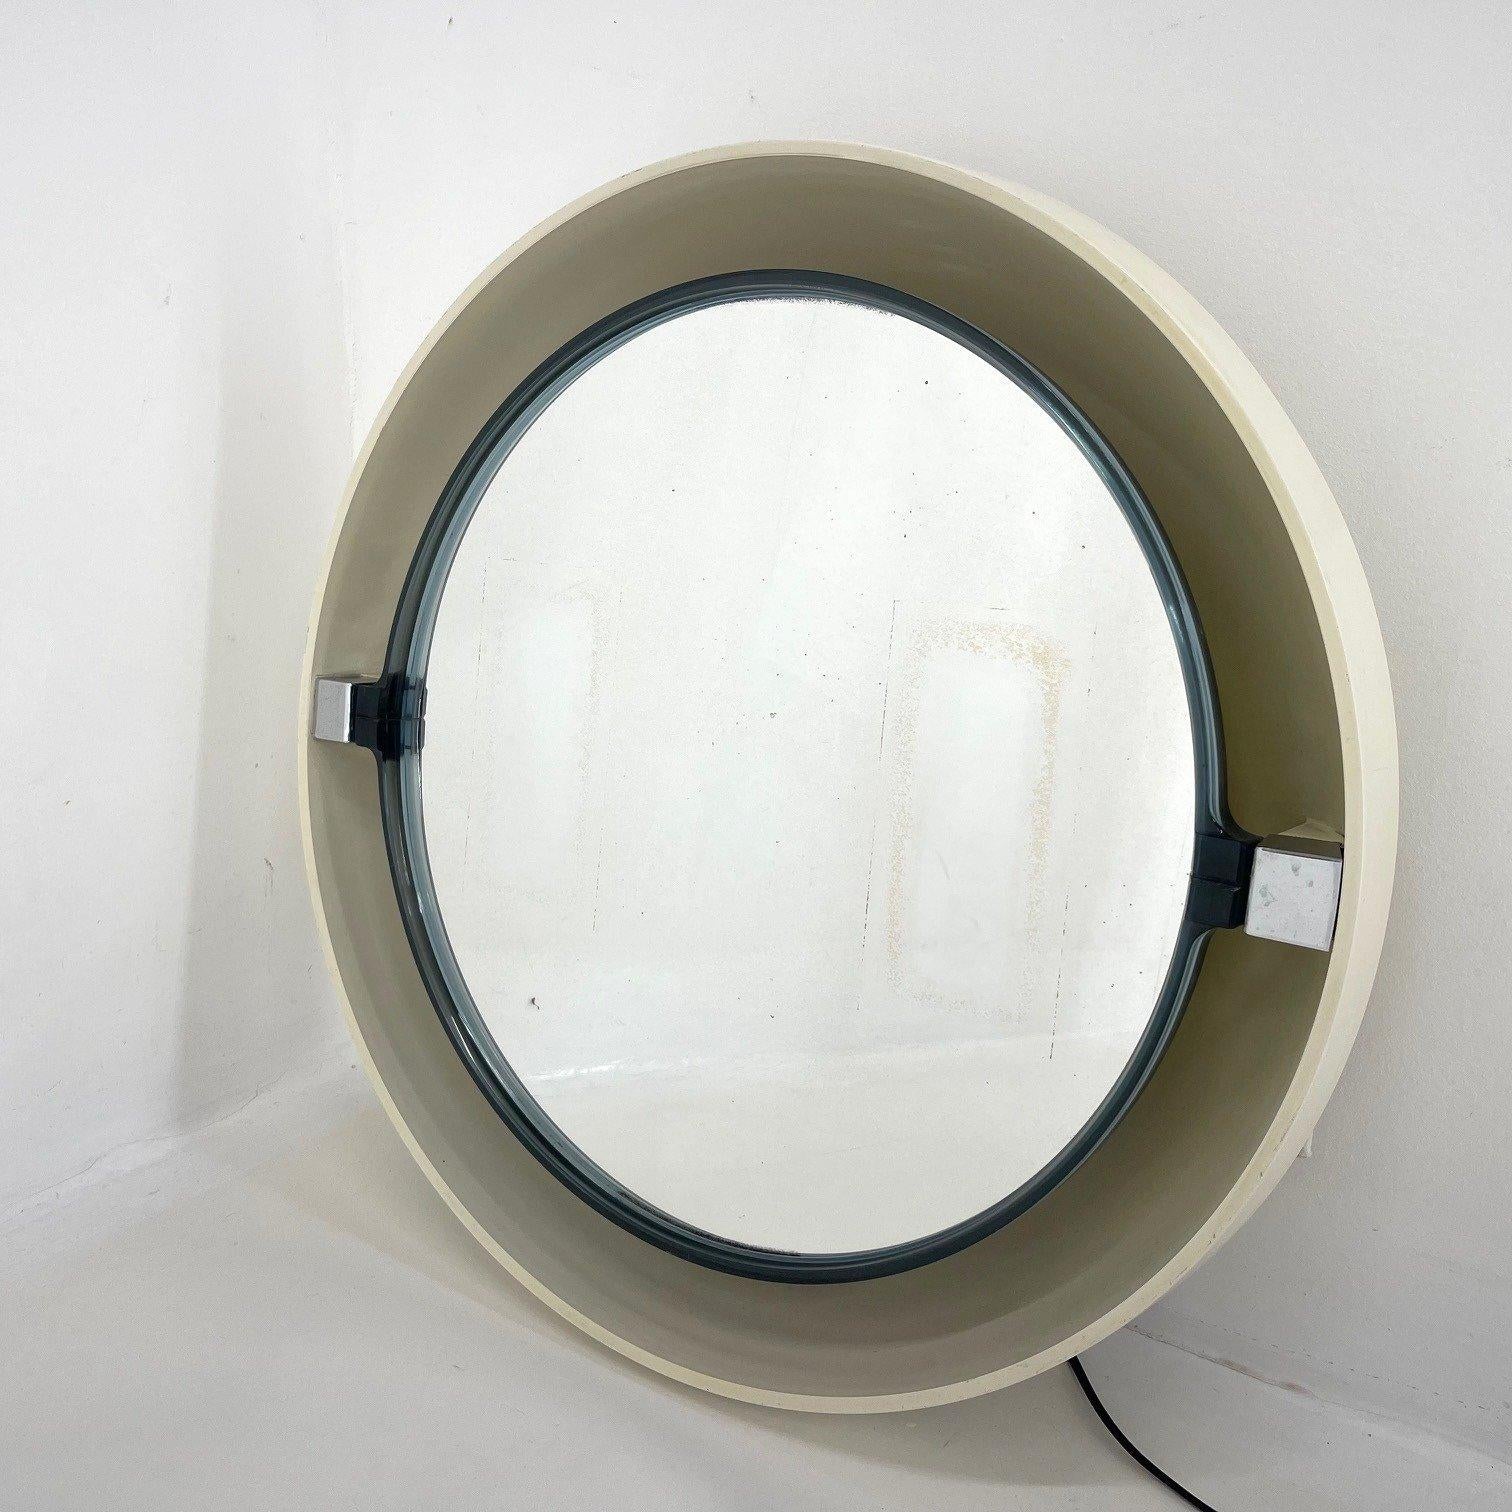 Beautiful vintage back-lit mirror. The back is made of plastic, the mirror itself is adjustable. There is a cord on the side for switching the light on and off. There are some signs of use (see photo).